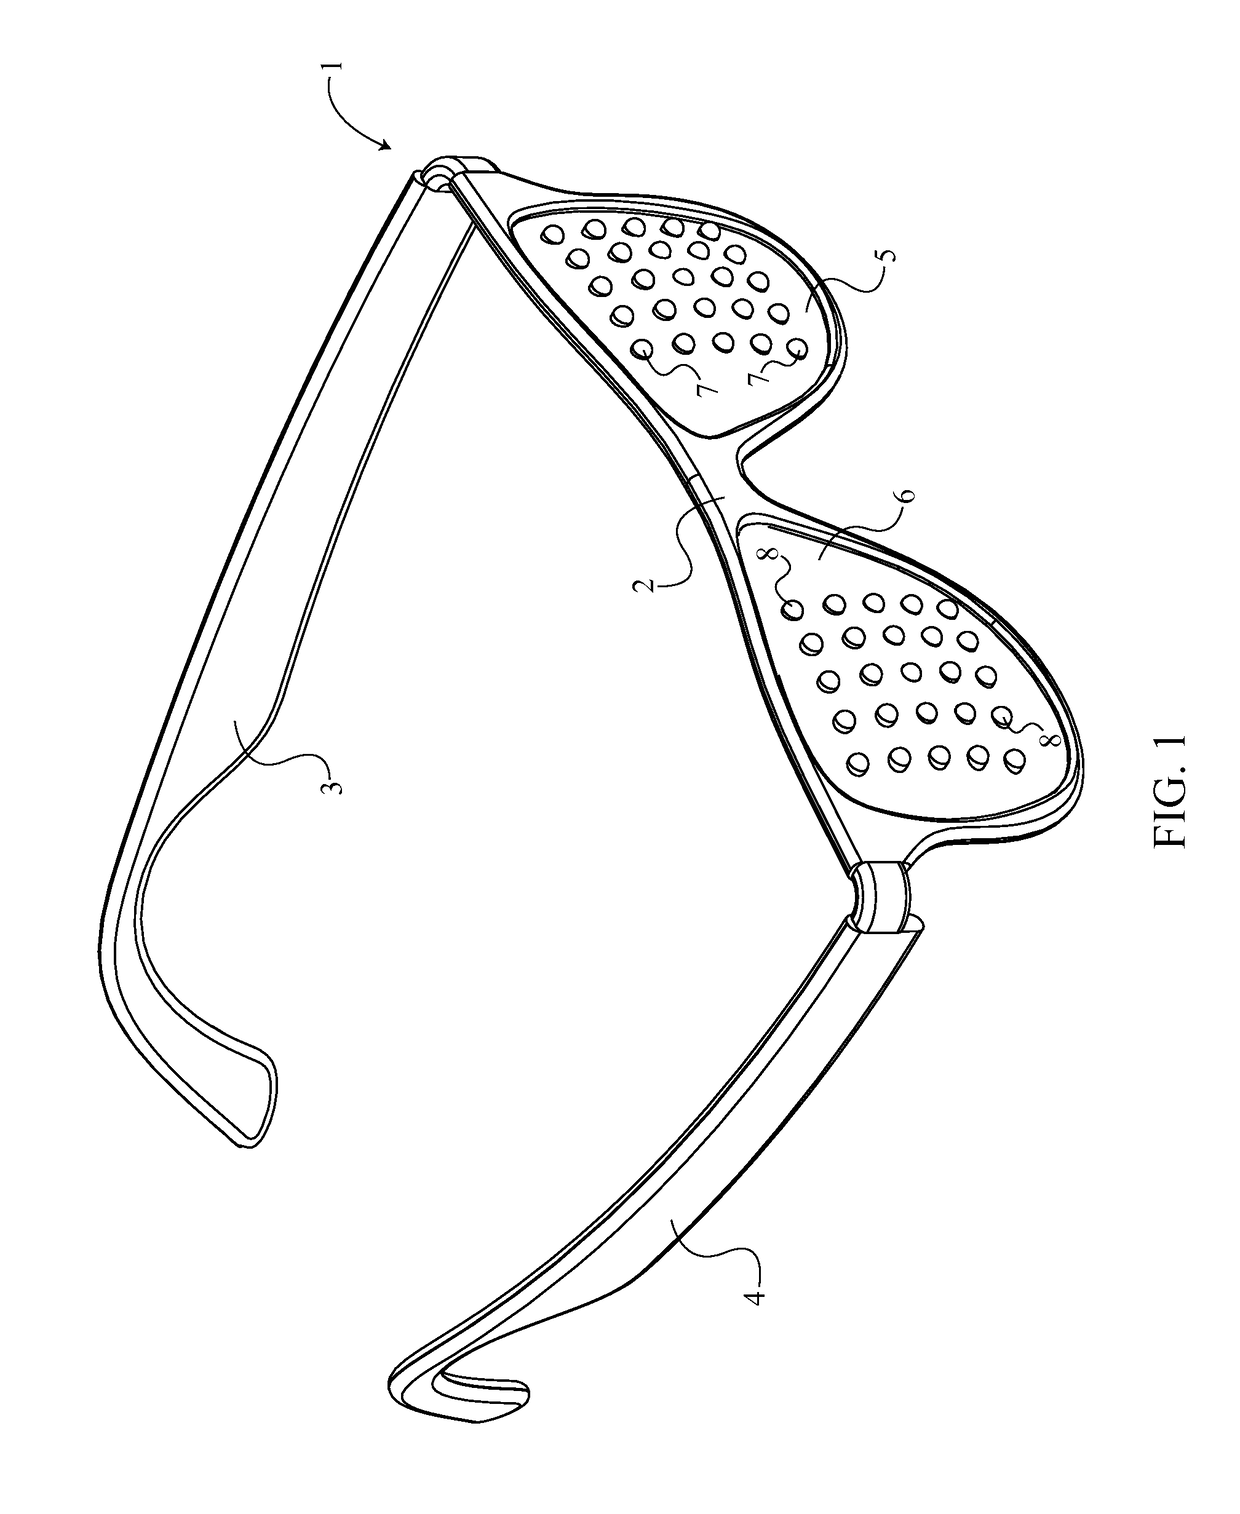 Eyewear with a pair of light emitting diode matrices